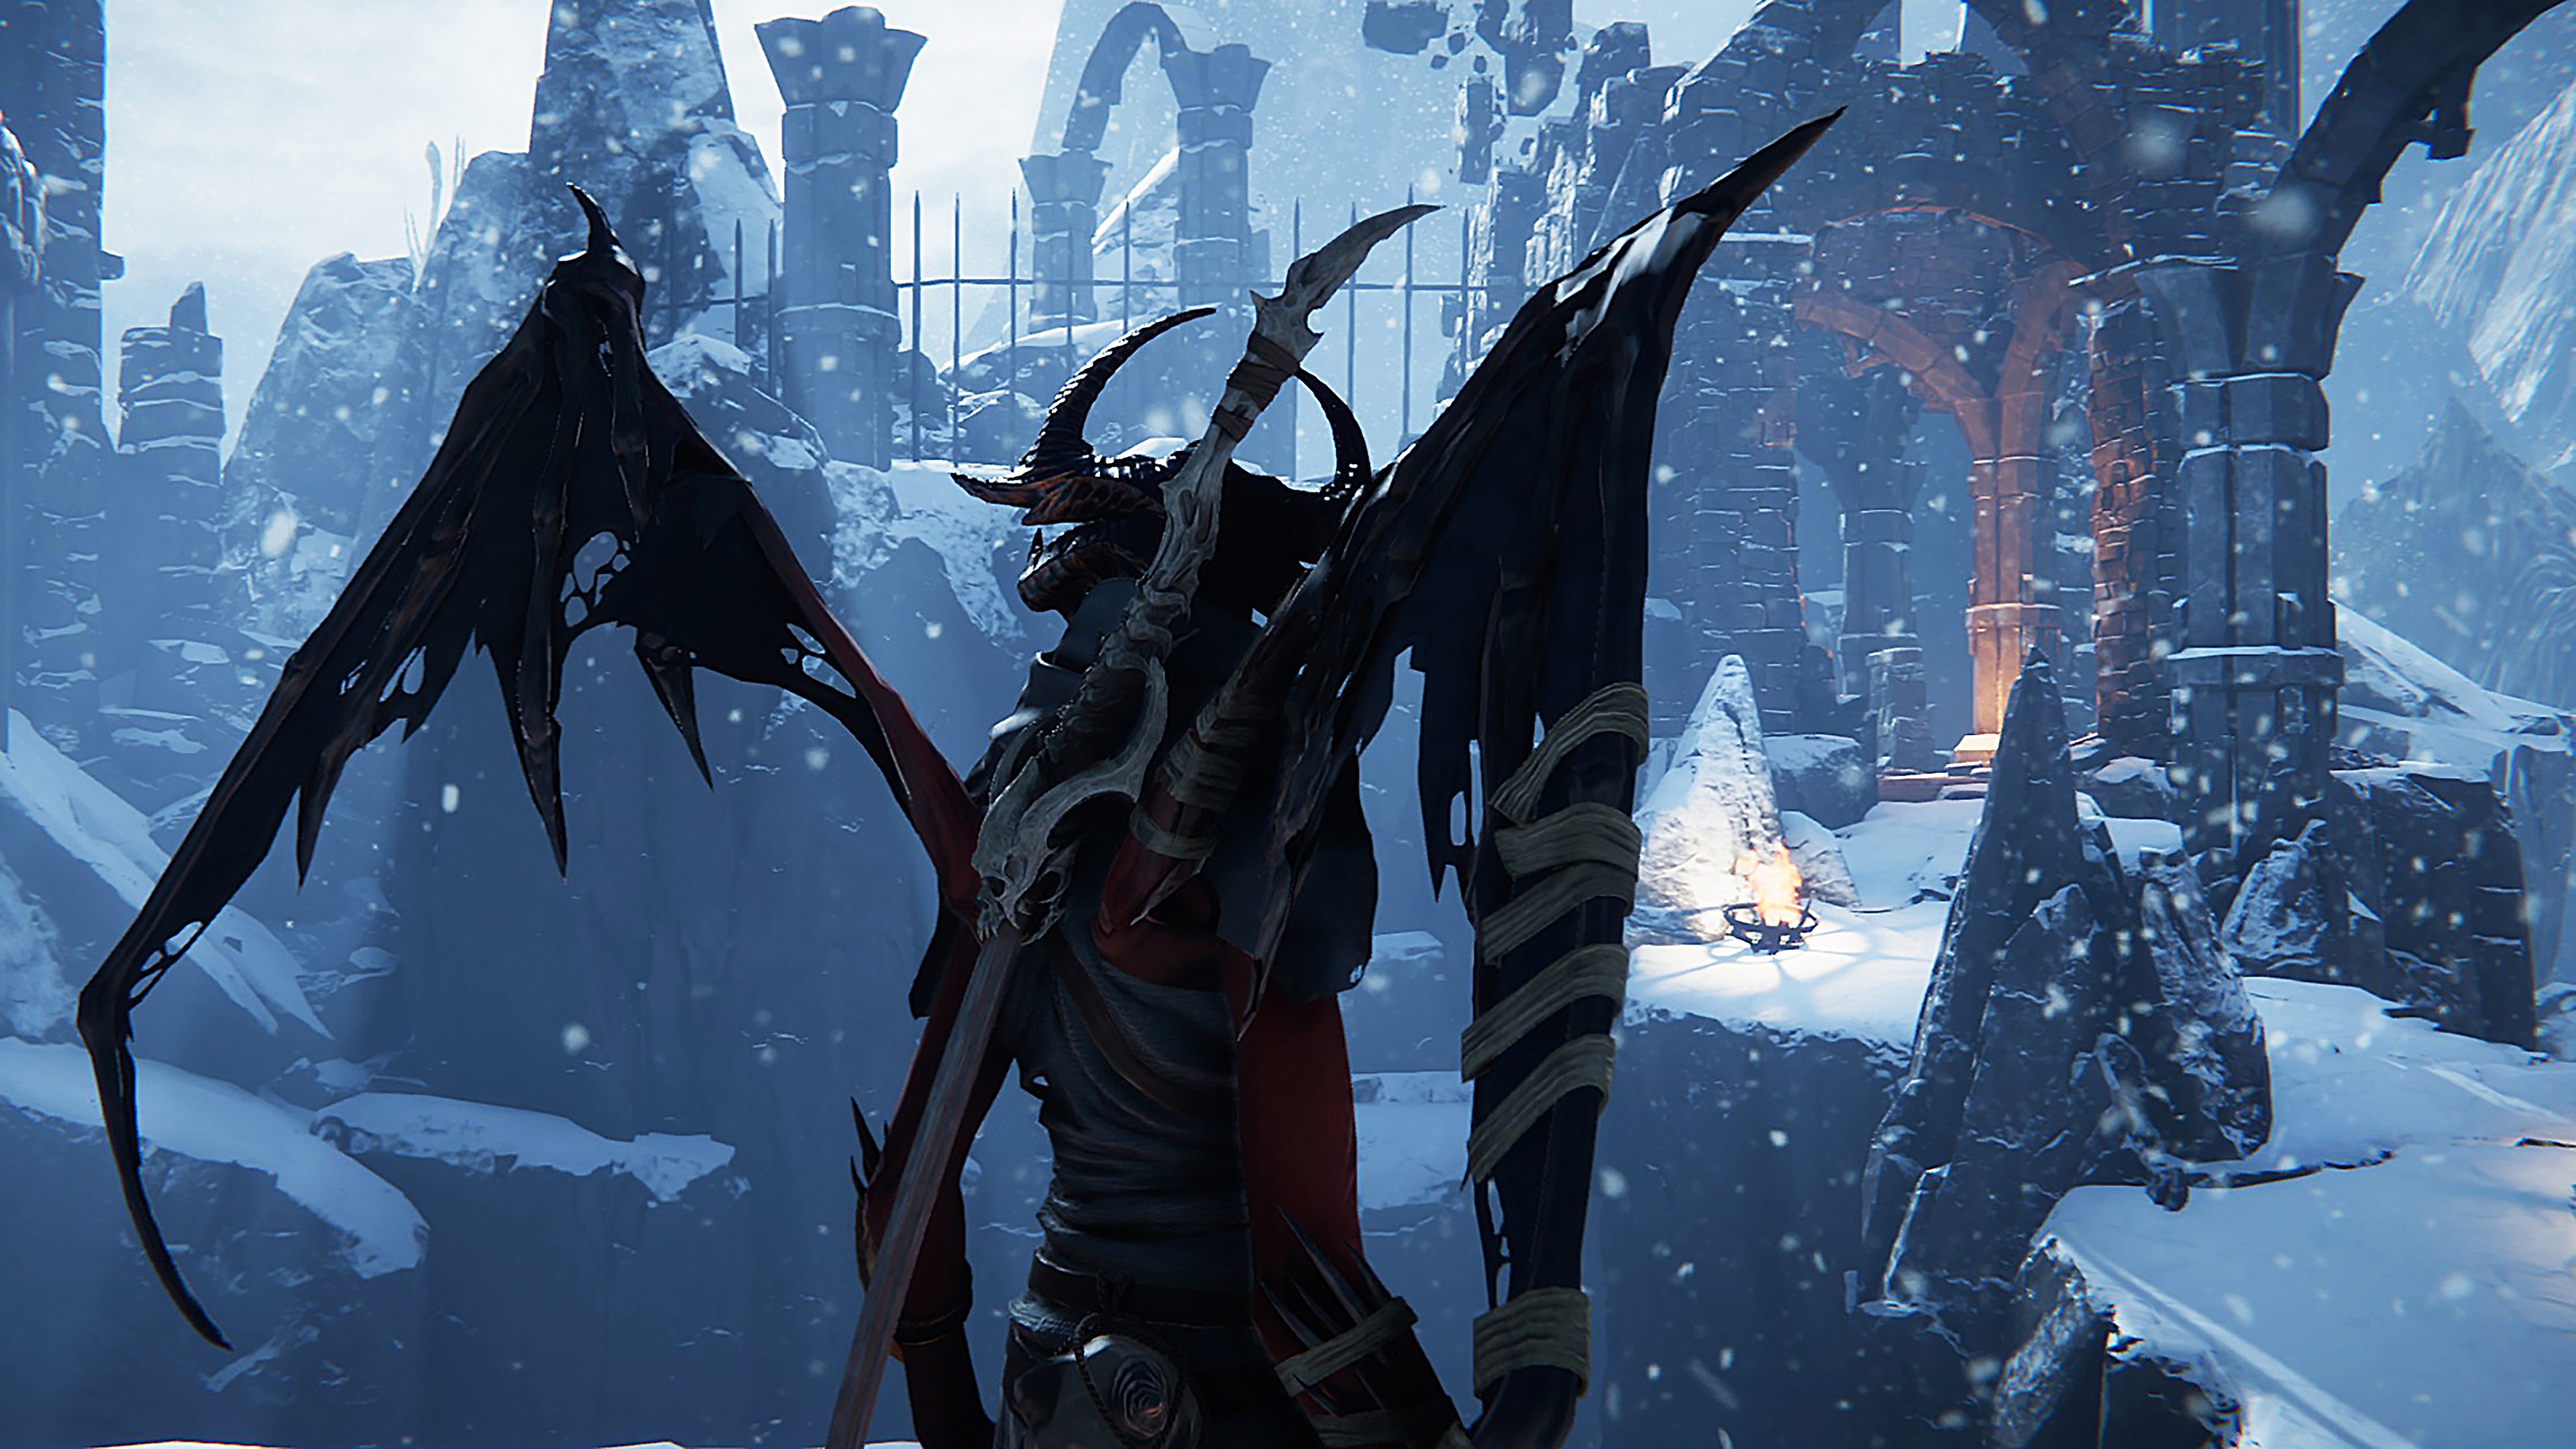 Metal: Hellsinger screenshot featuring a winged creature in a barren, snow-covered environment.